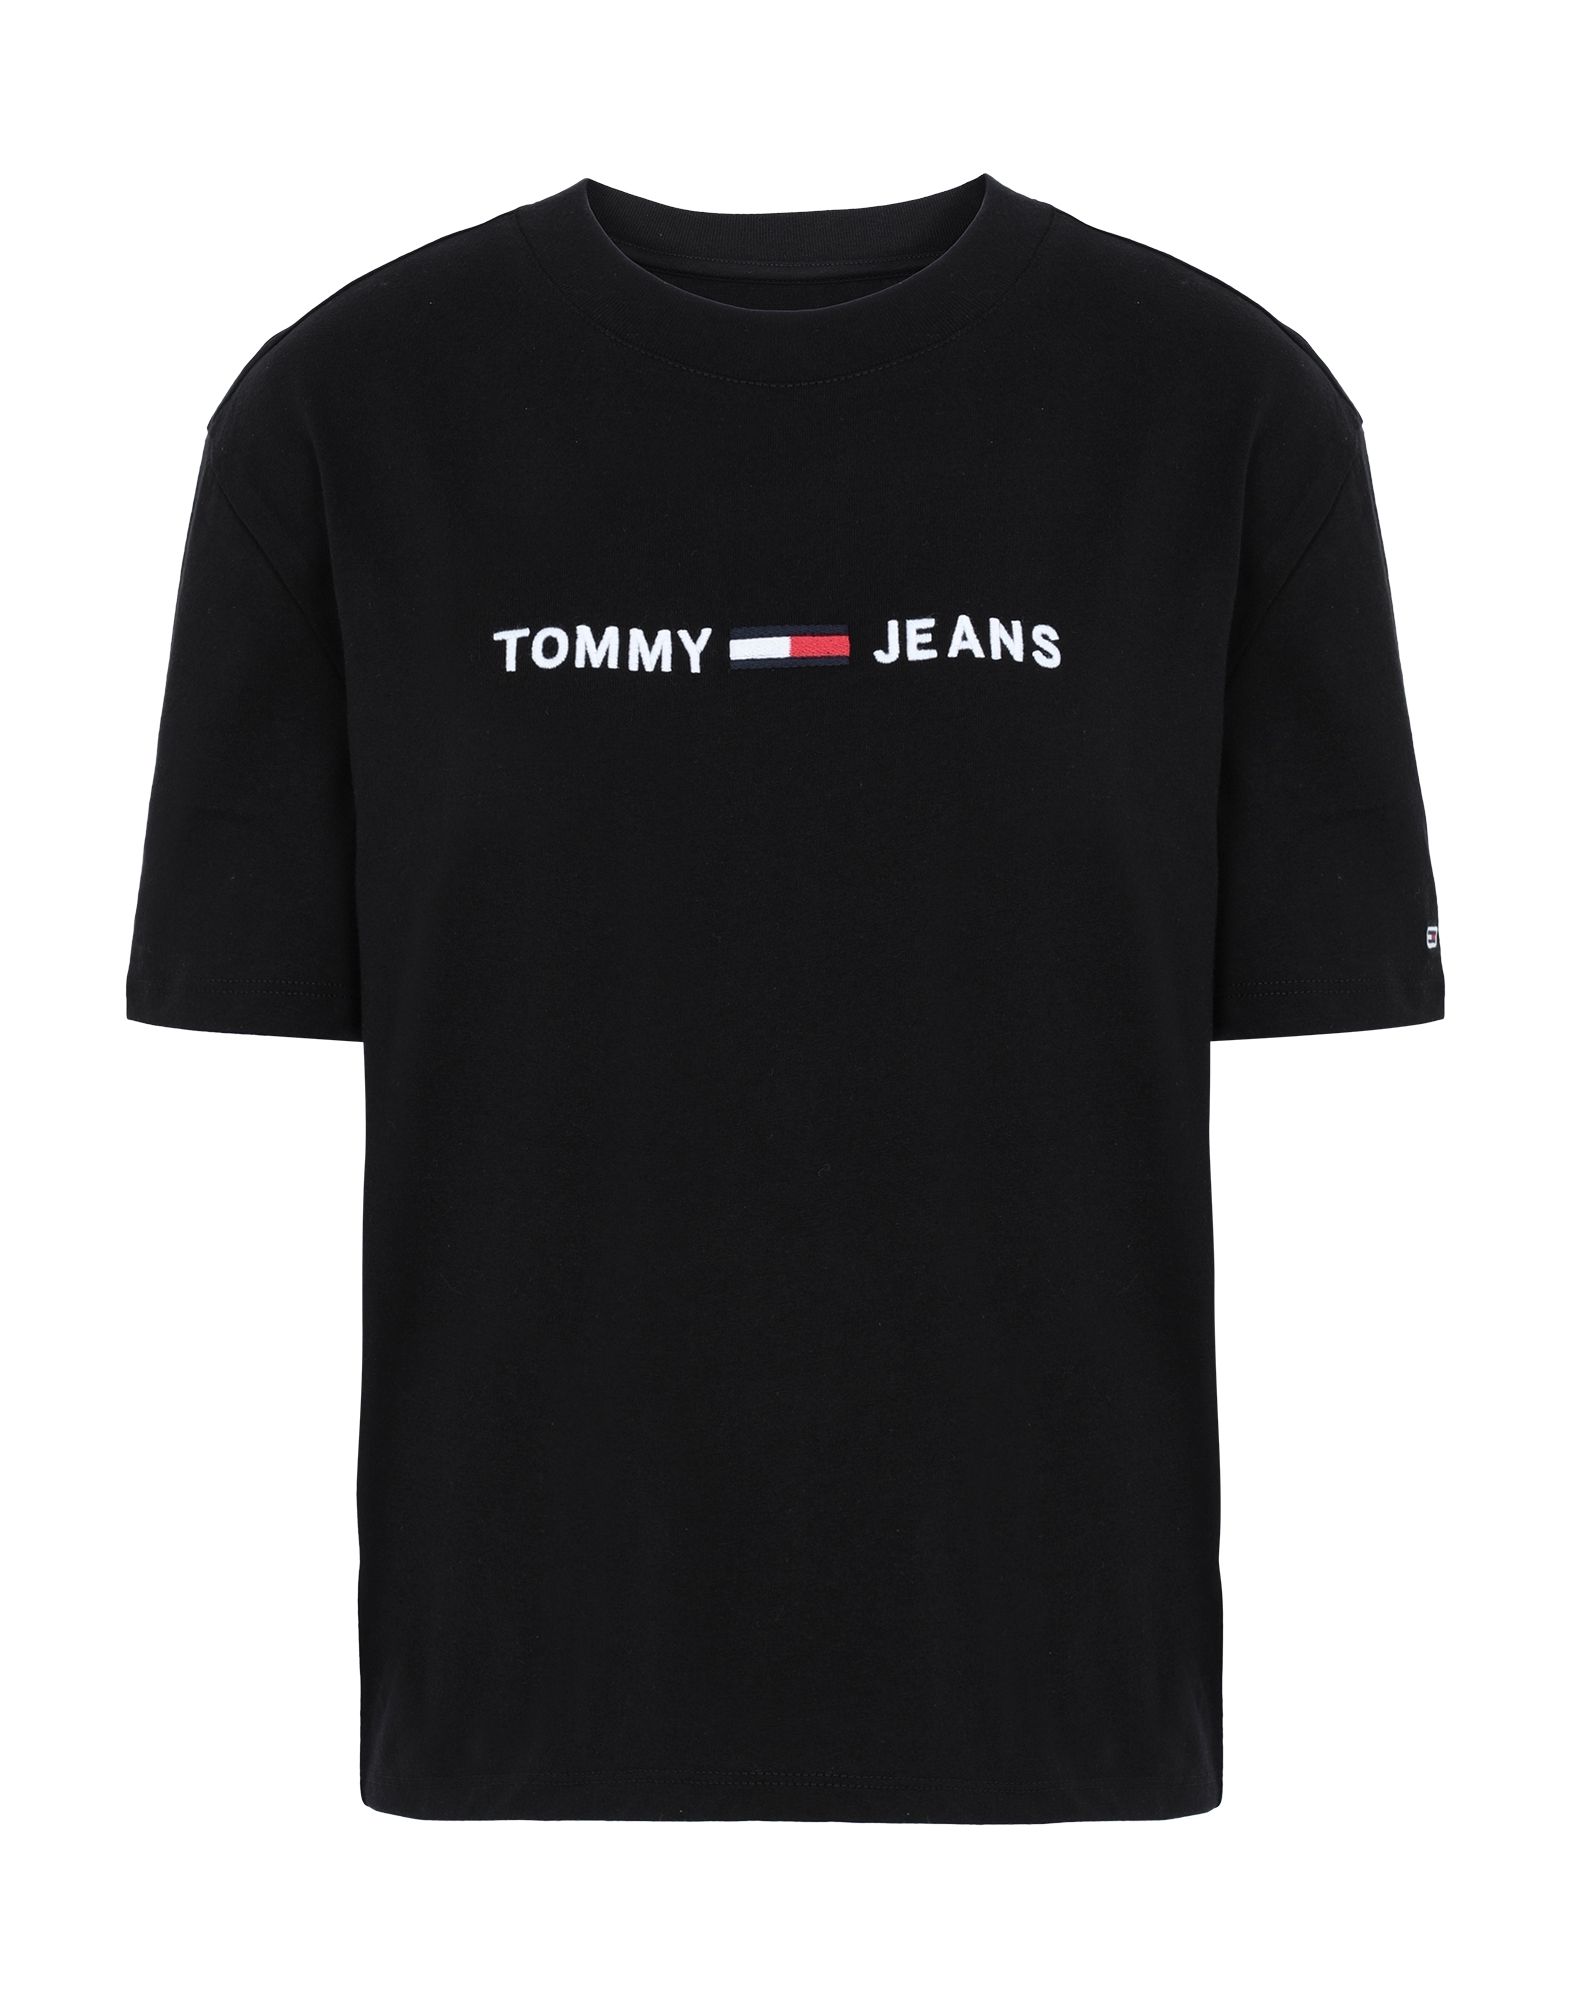   TOMMY JEANS